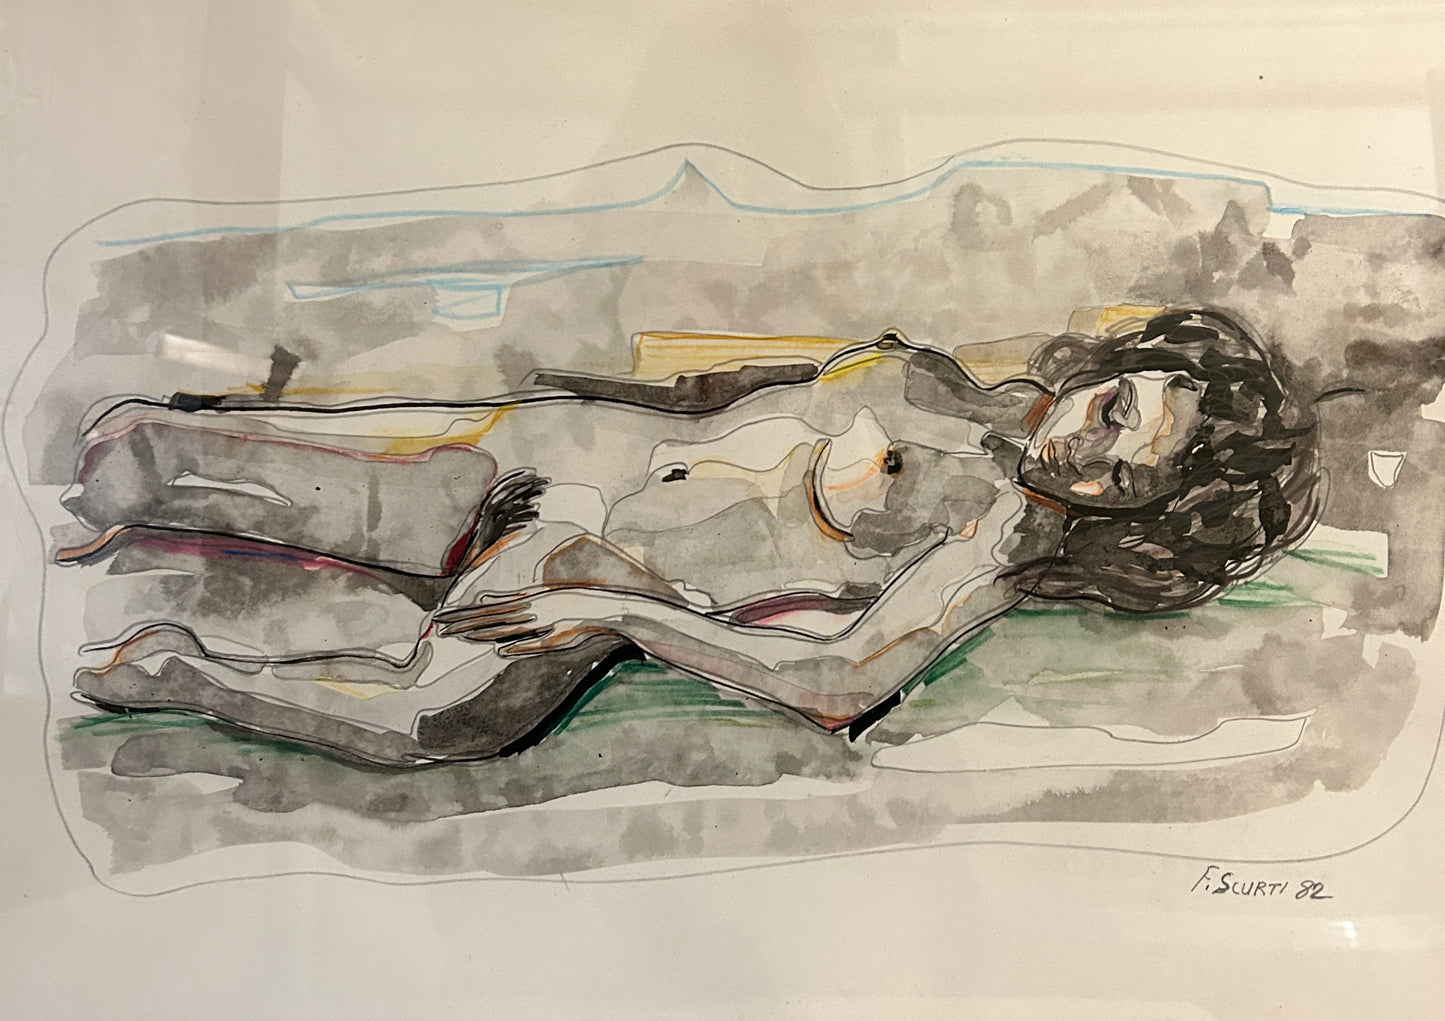 Reclining Nude by Franck Scurti